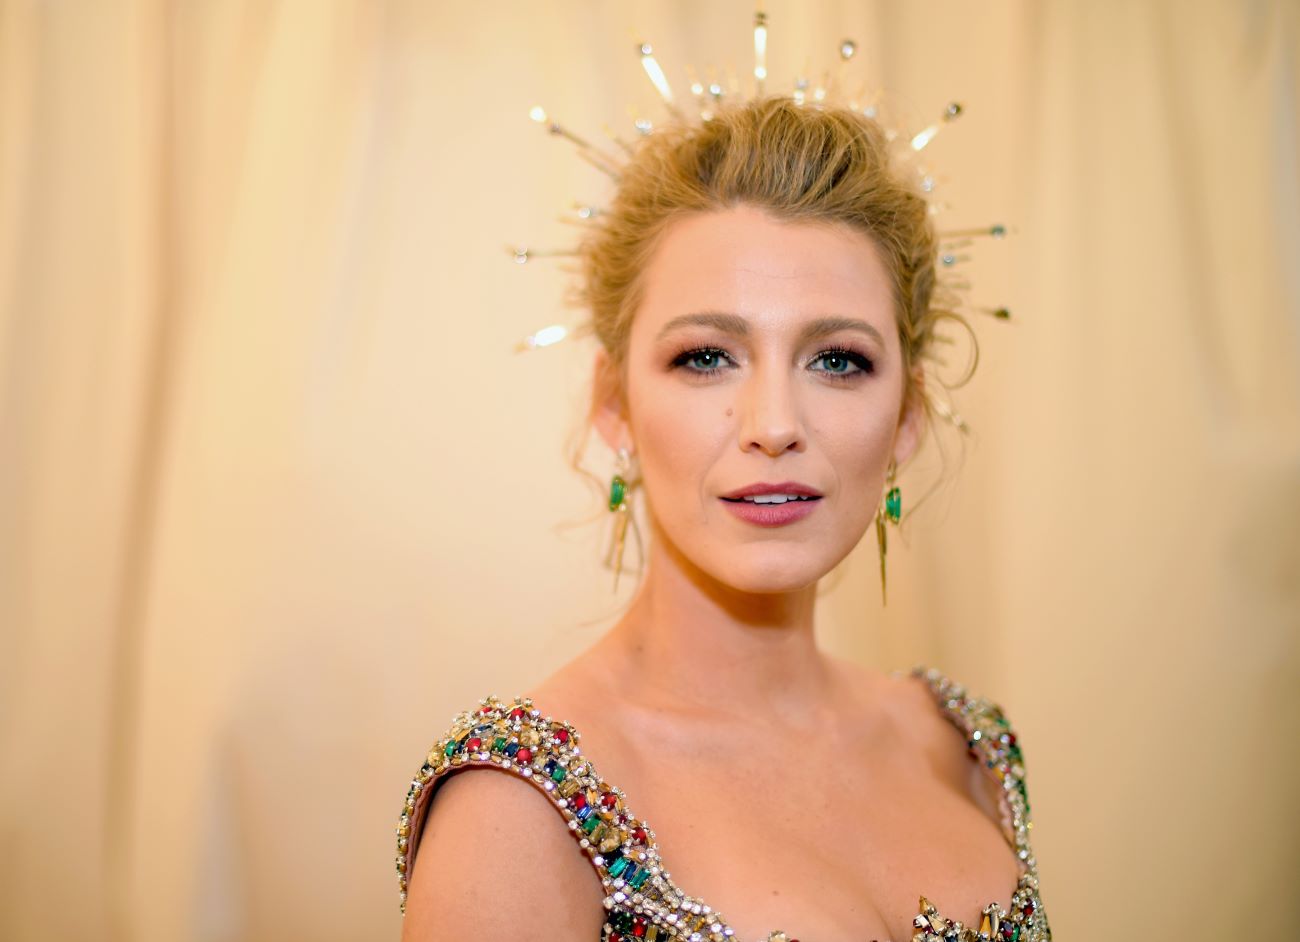 Blake Lively wears a sunbeam crown and bejeweled outfit at the 2018 Met Gala.